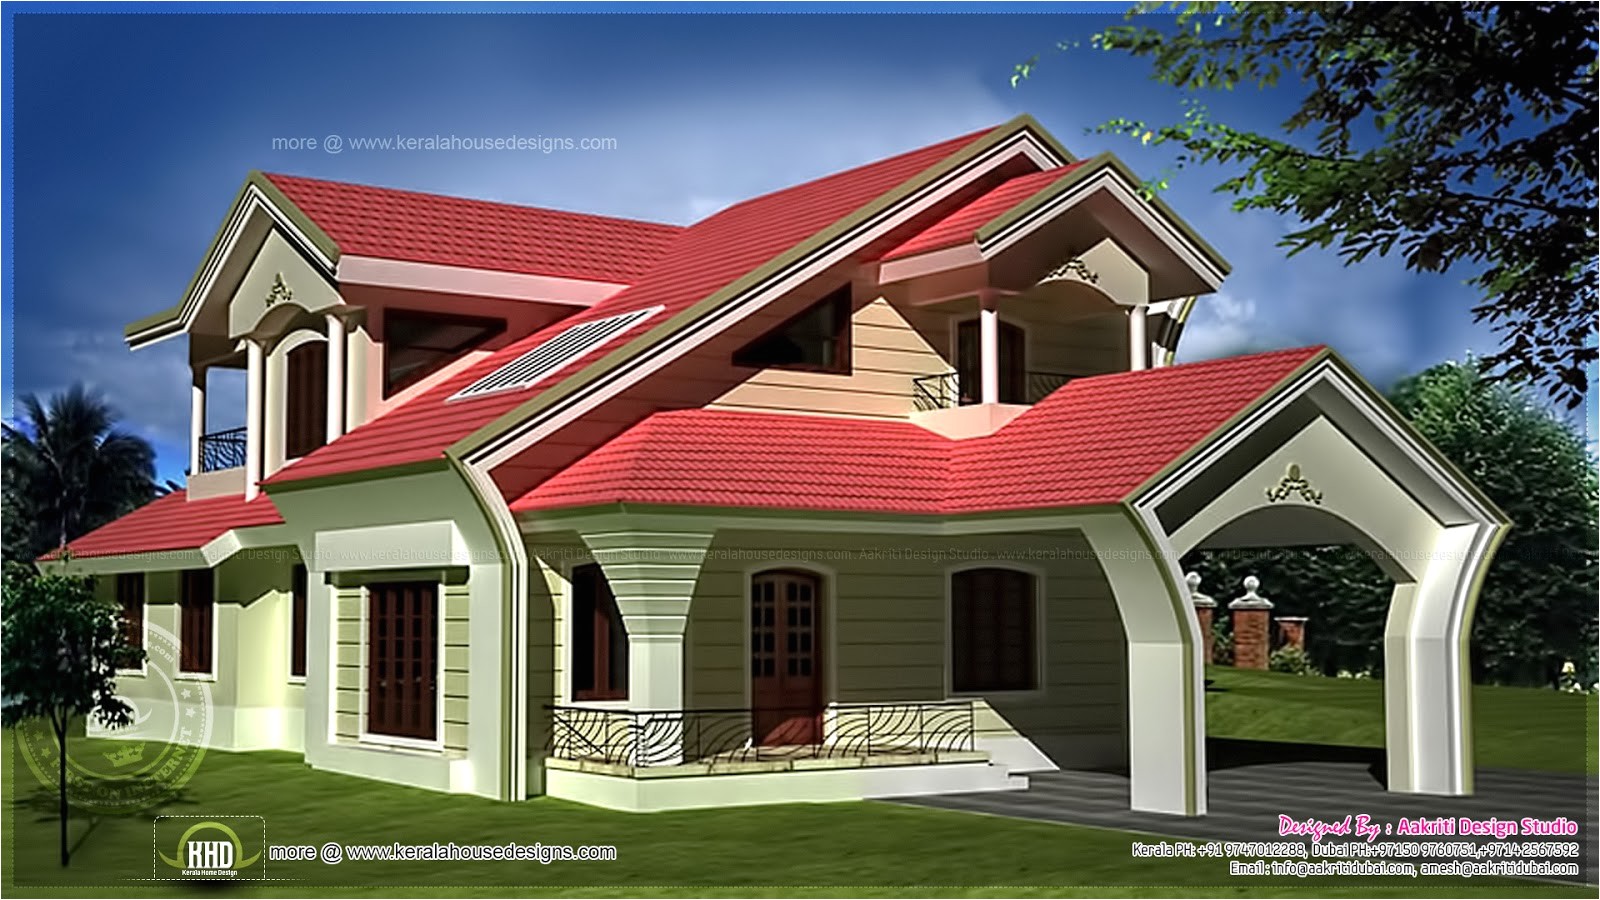 Unusual Home Plans September 2013 Kerala Home Design and Floor Plans